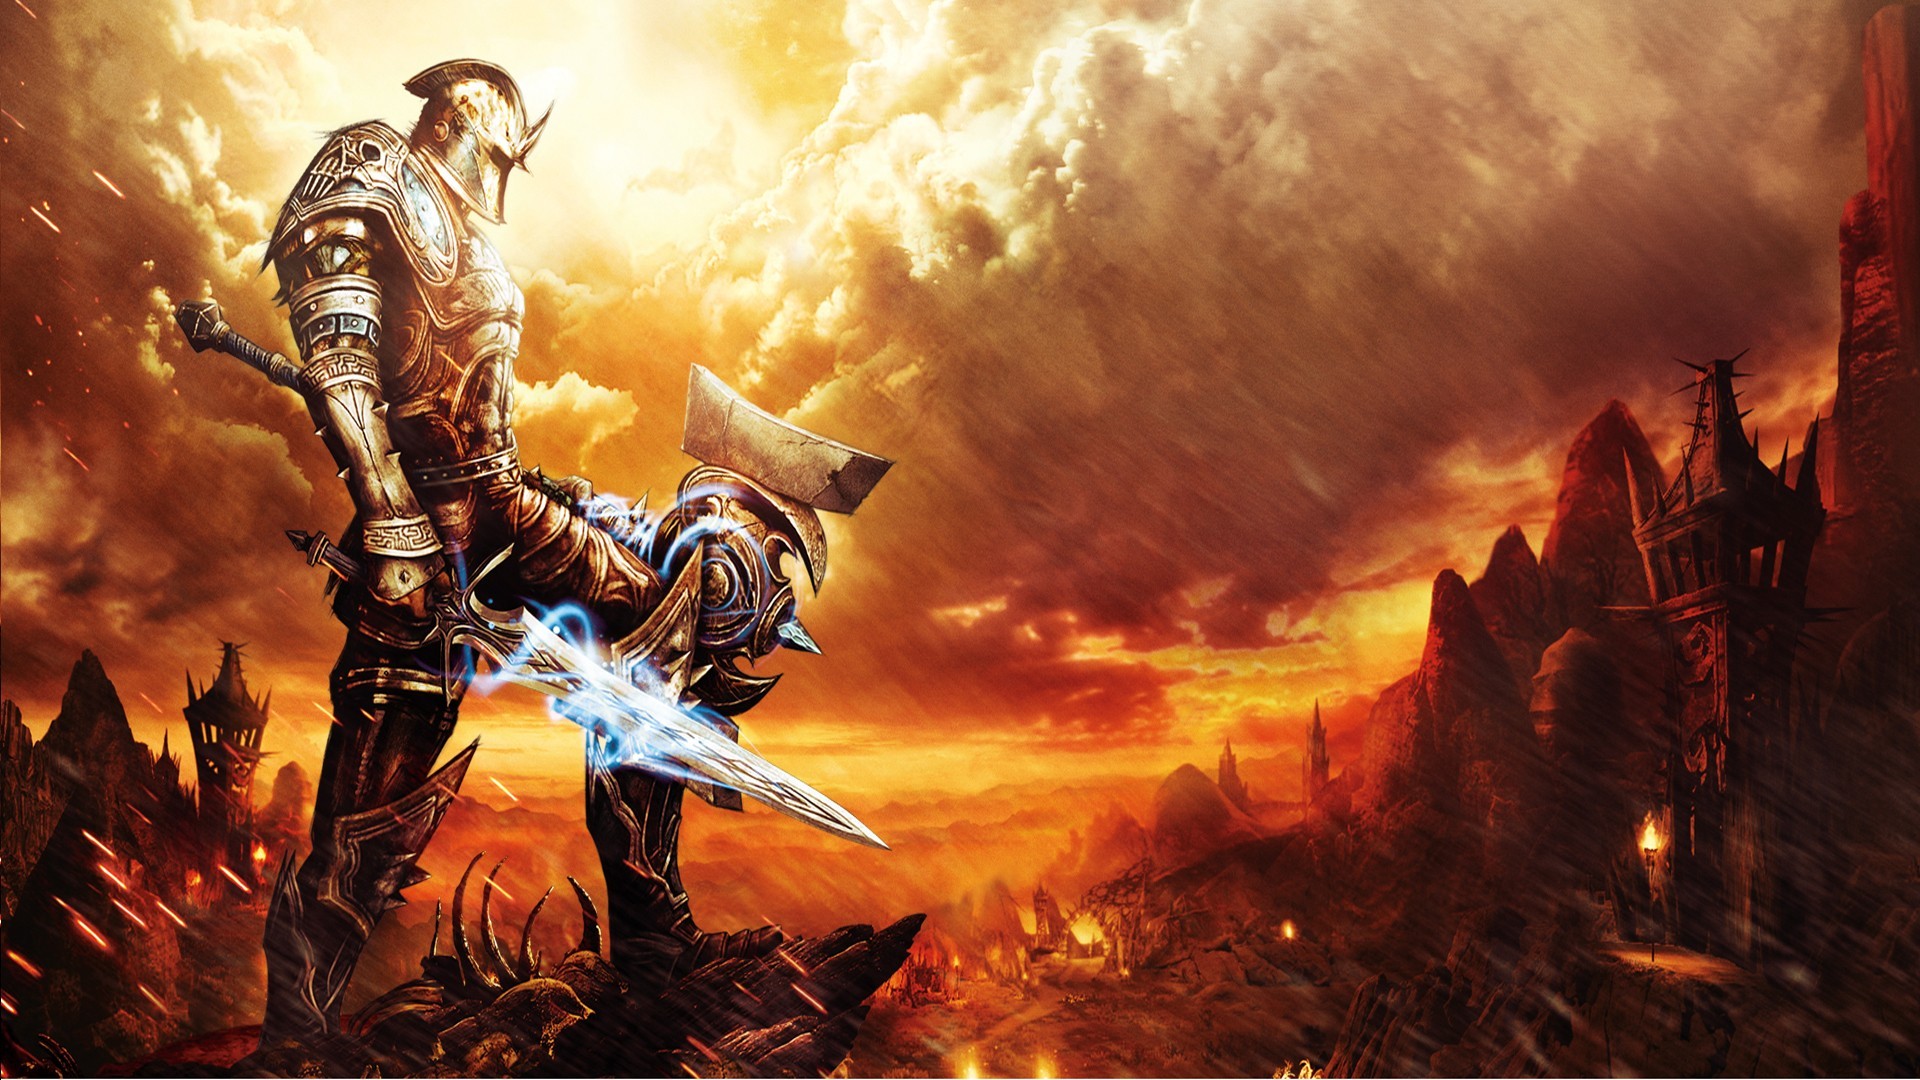 Computer Game Warrior PC Gaming Video Games Video Game Art Fantasy Art Armored 1920x1080